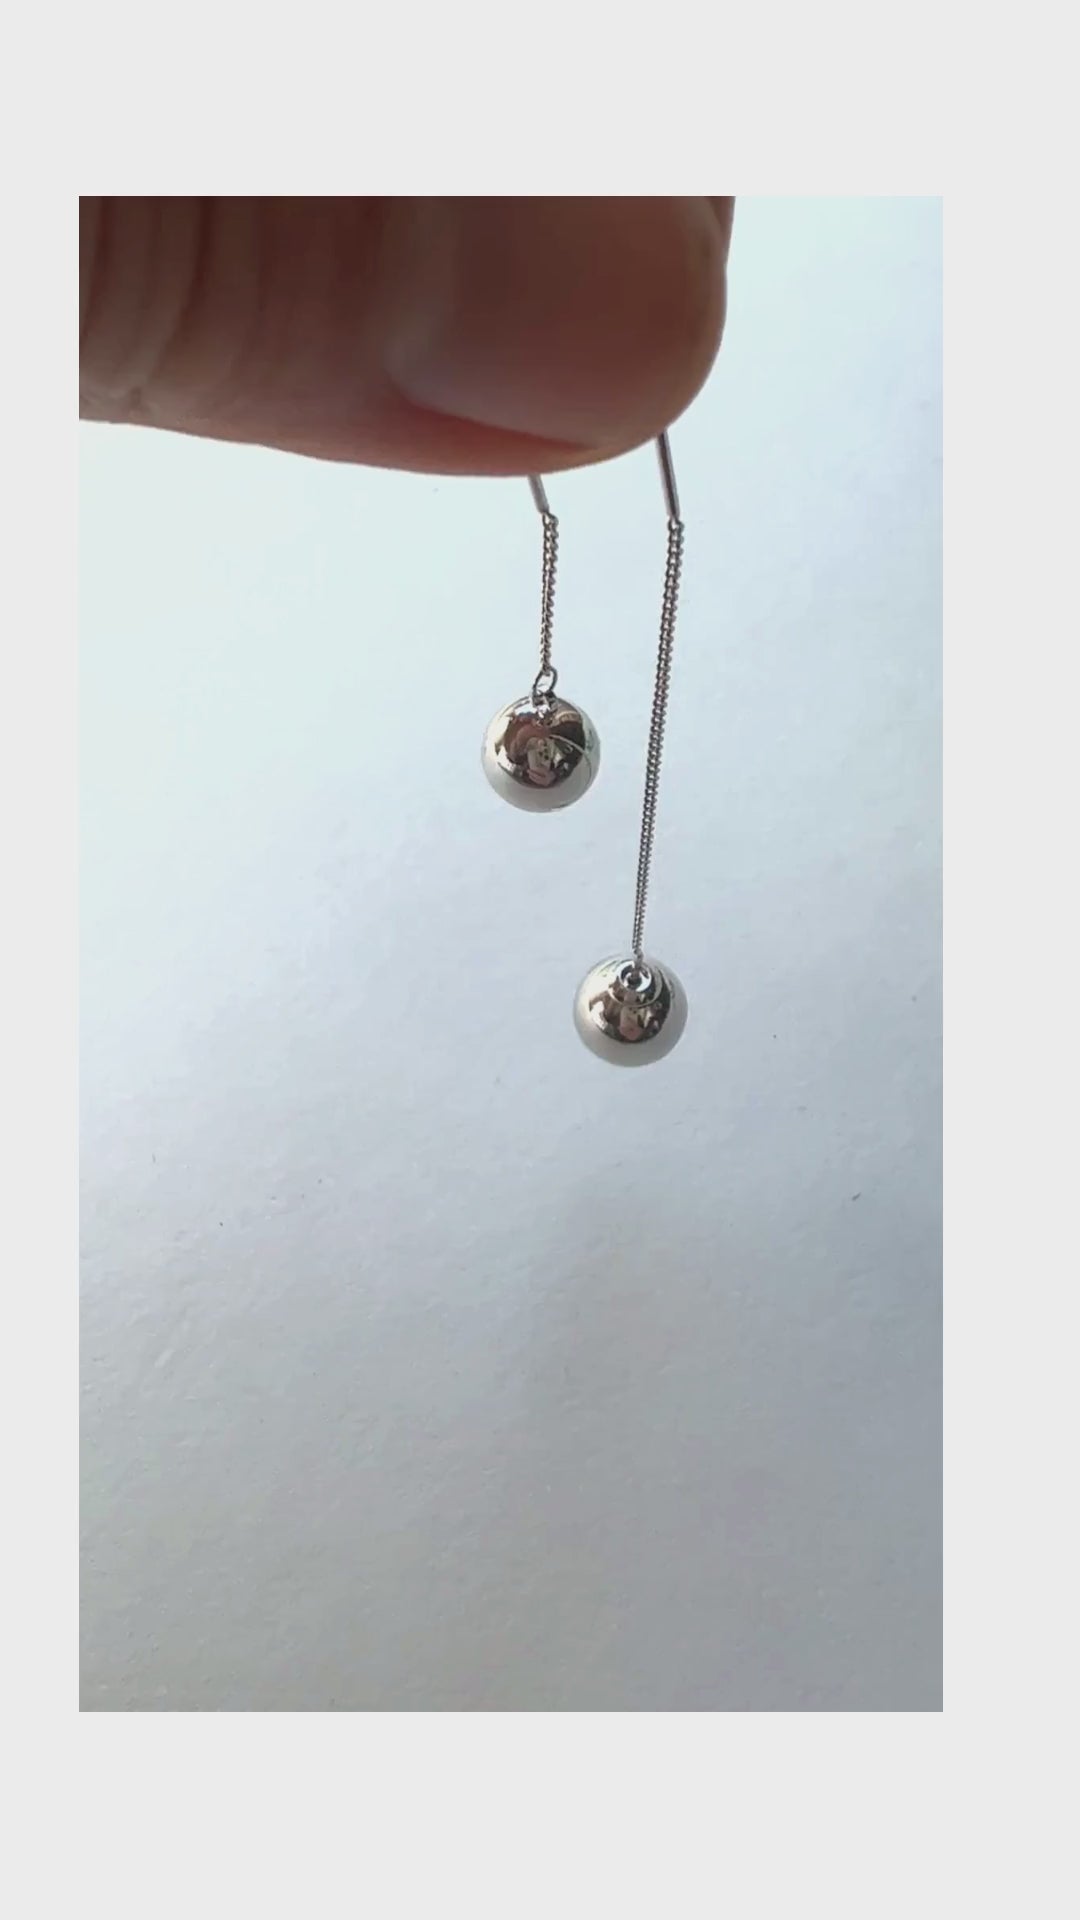 Two balls are suspended from a chain and appear to balance. The ball (on the longer chain) is removable so you can put on the earring and then reattach then end. 